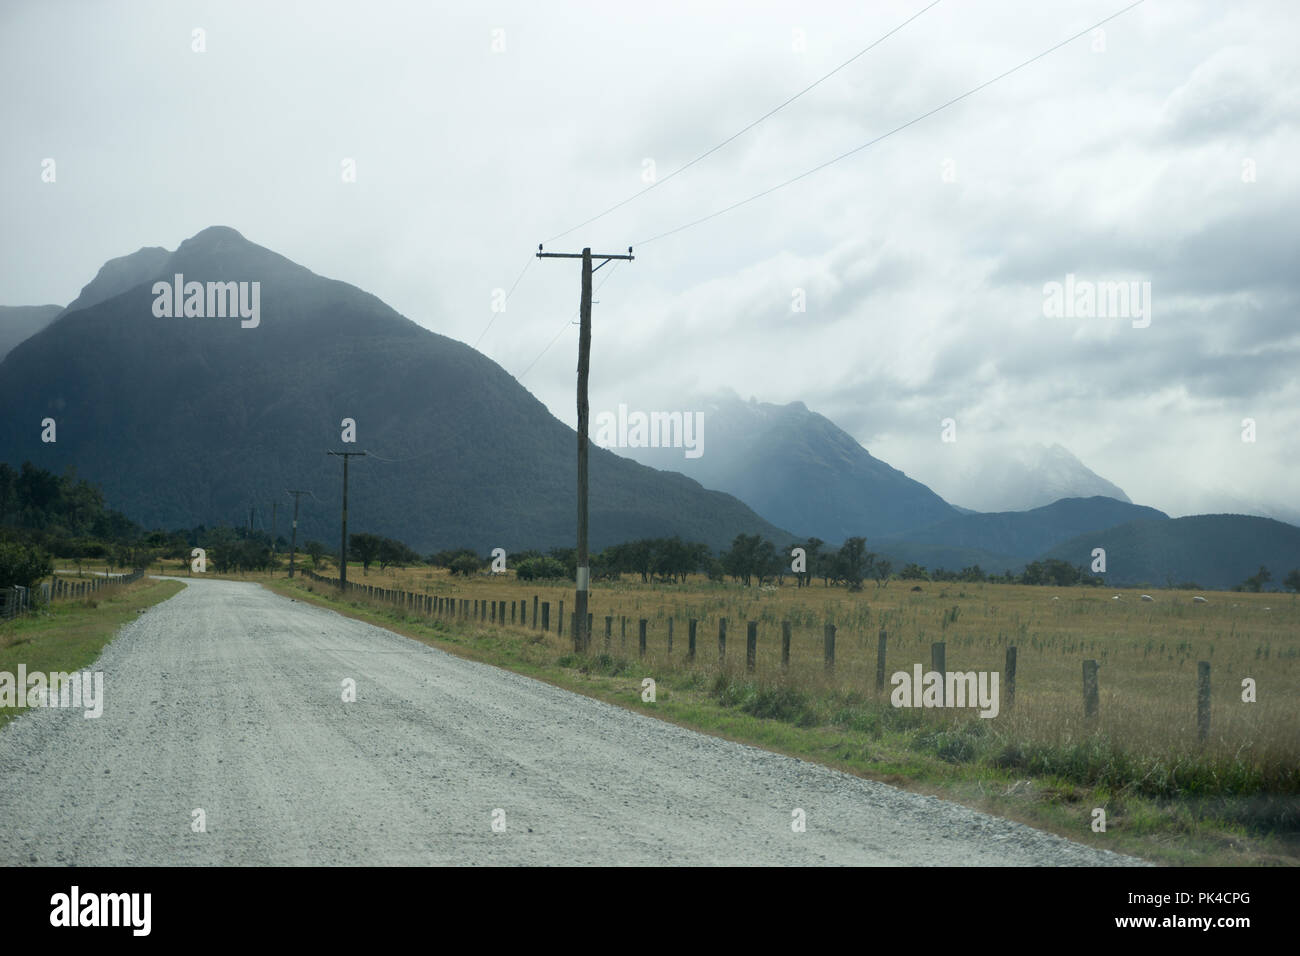 Paradise in Glenorchy, Storm Coming, Rural Road, Mystical Views before storm Stock Photo